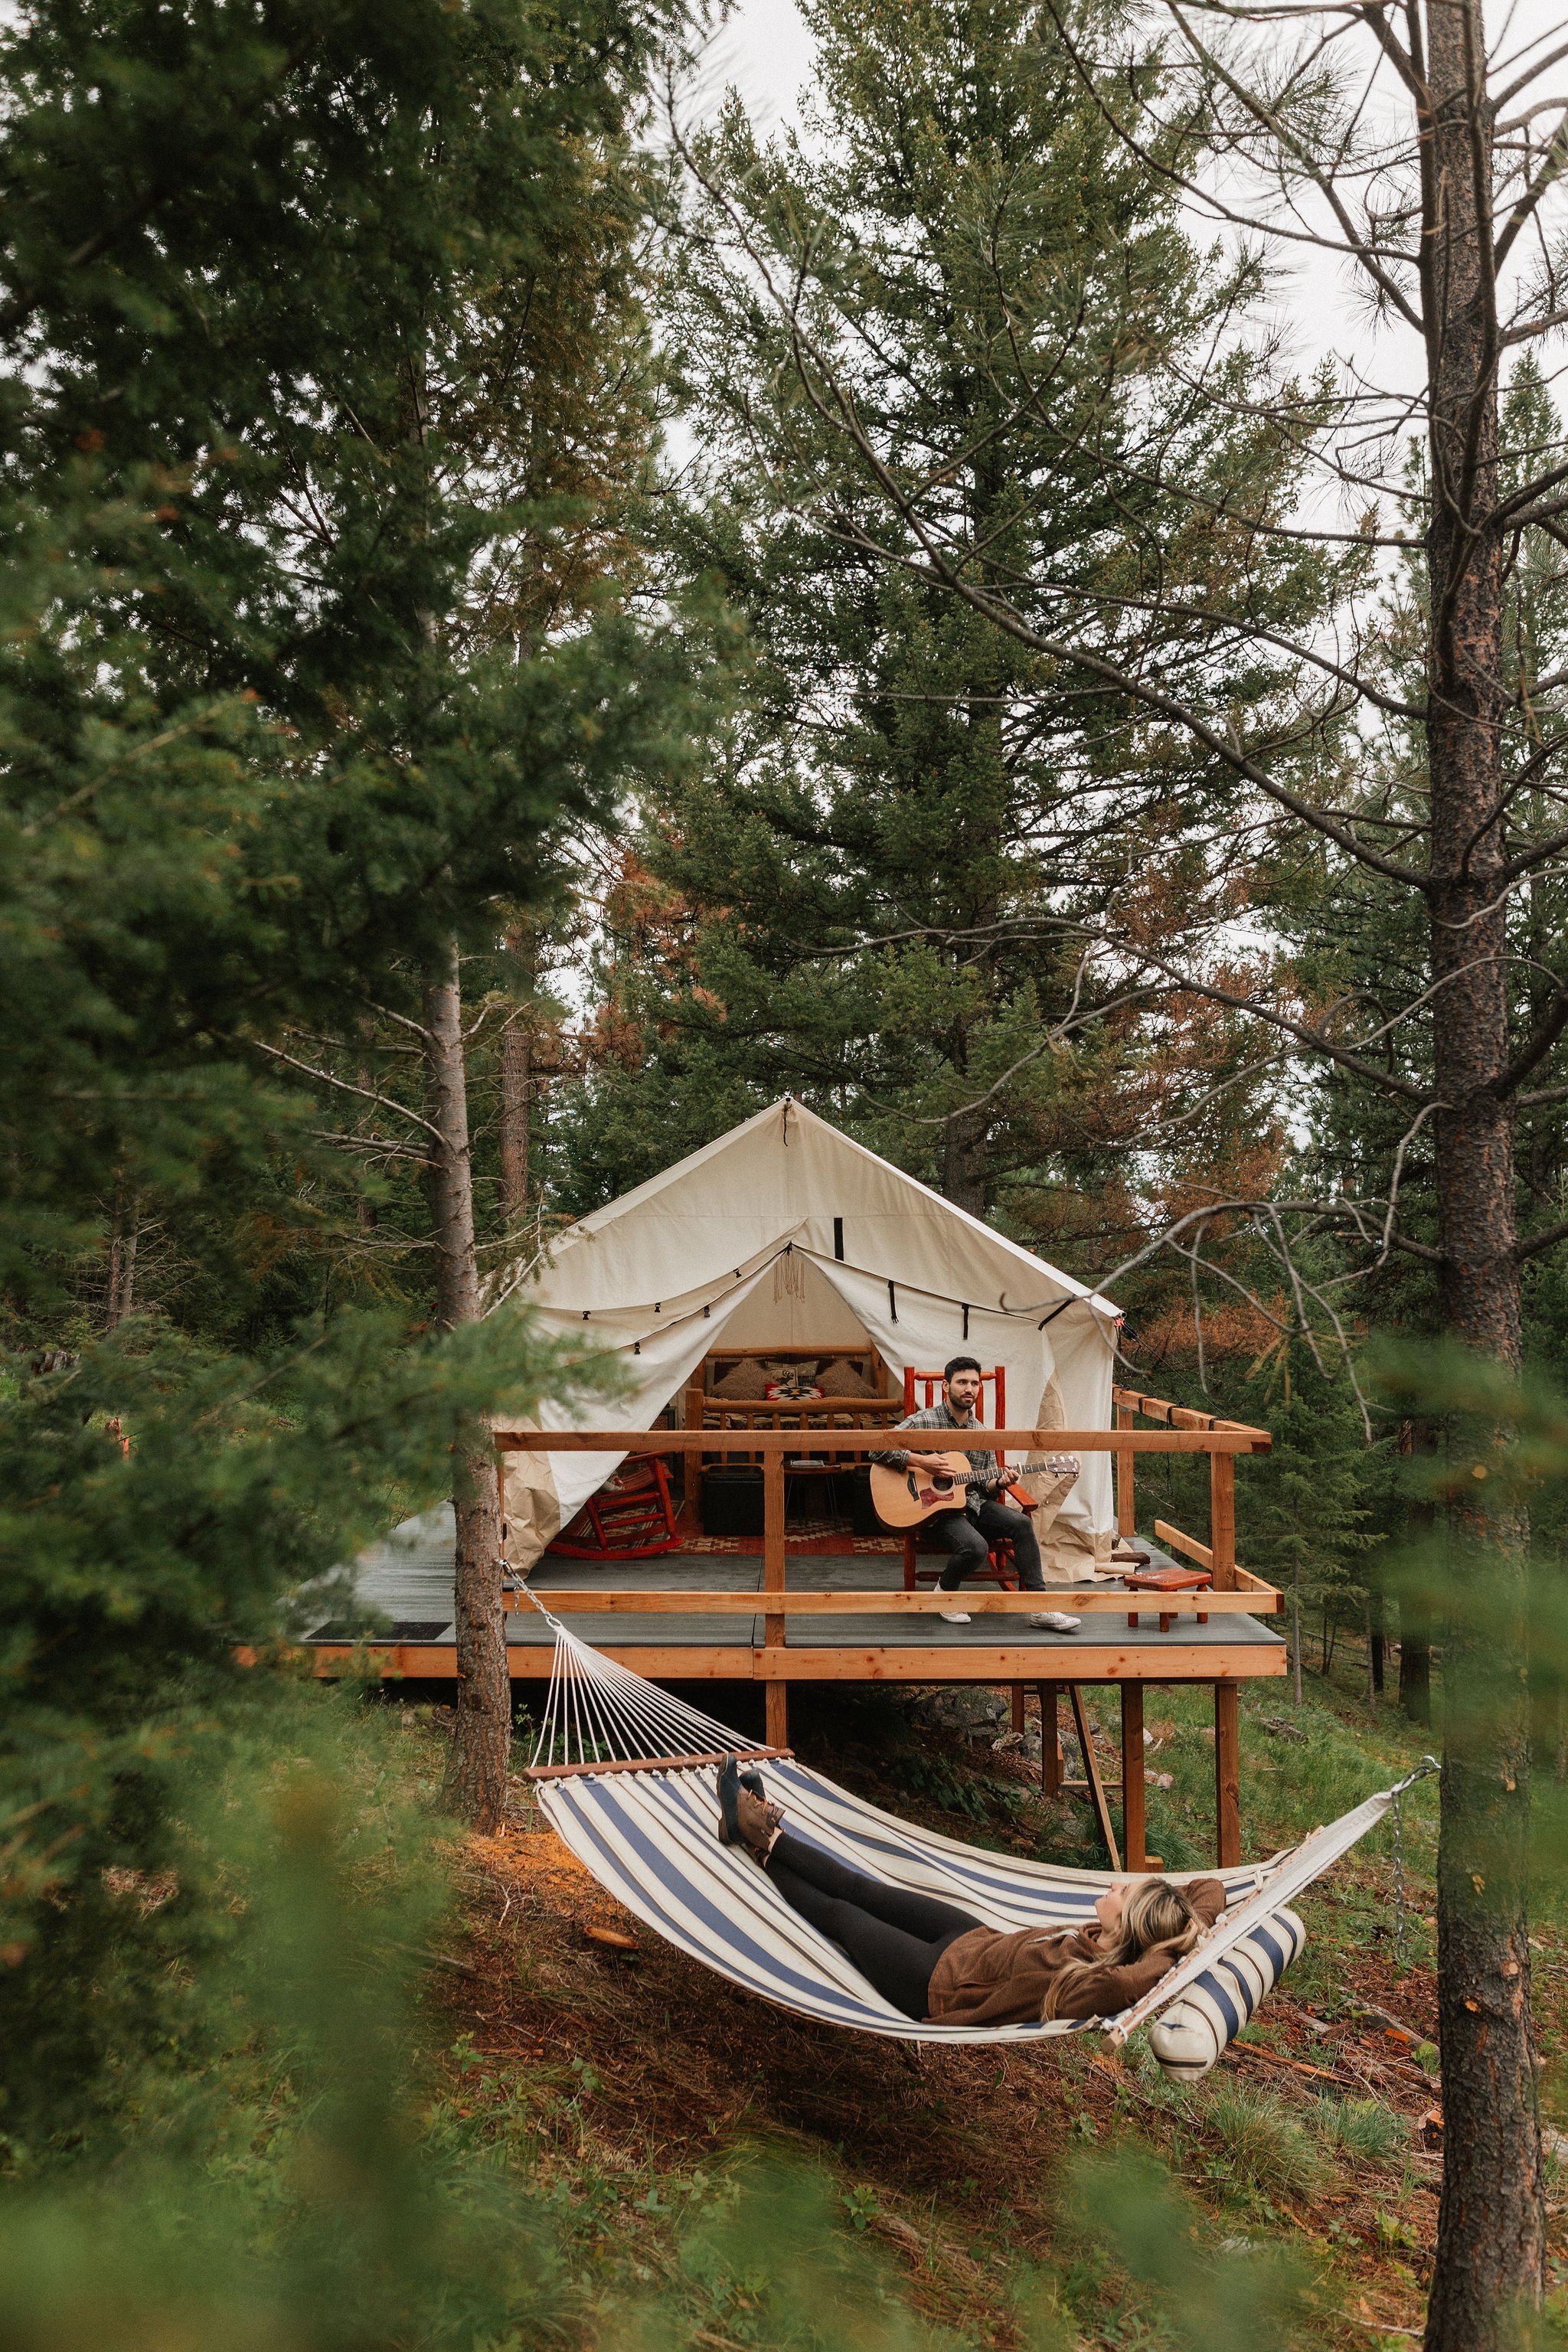 The Ranch Hand Glamping Tent at The Hohnstead Glamping Cabins Resort near Missoula, Montana